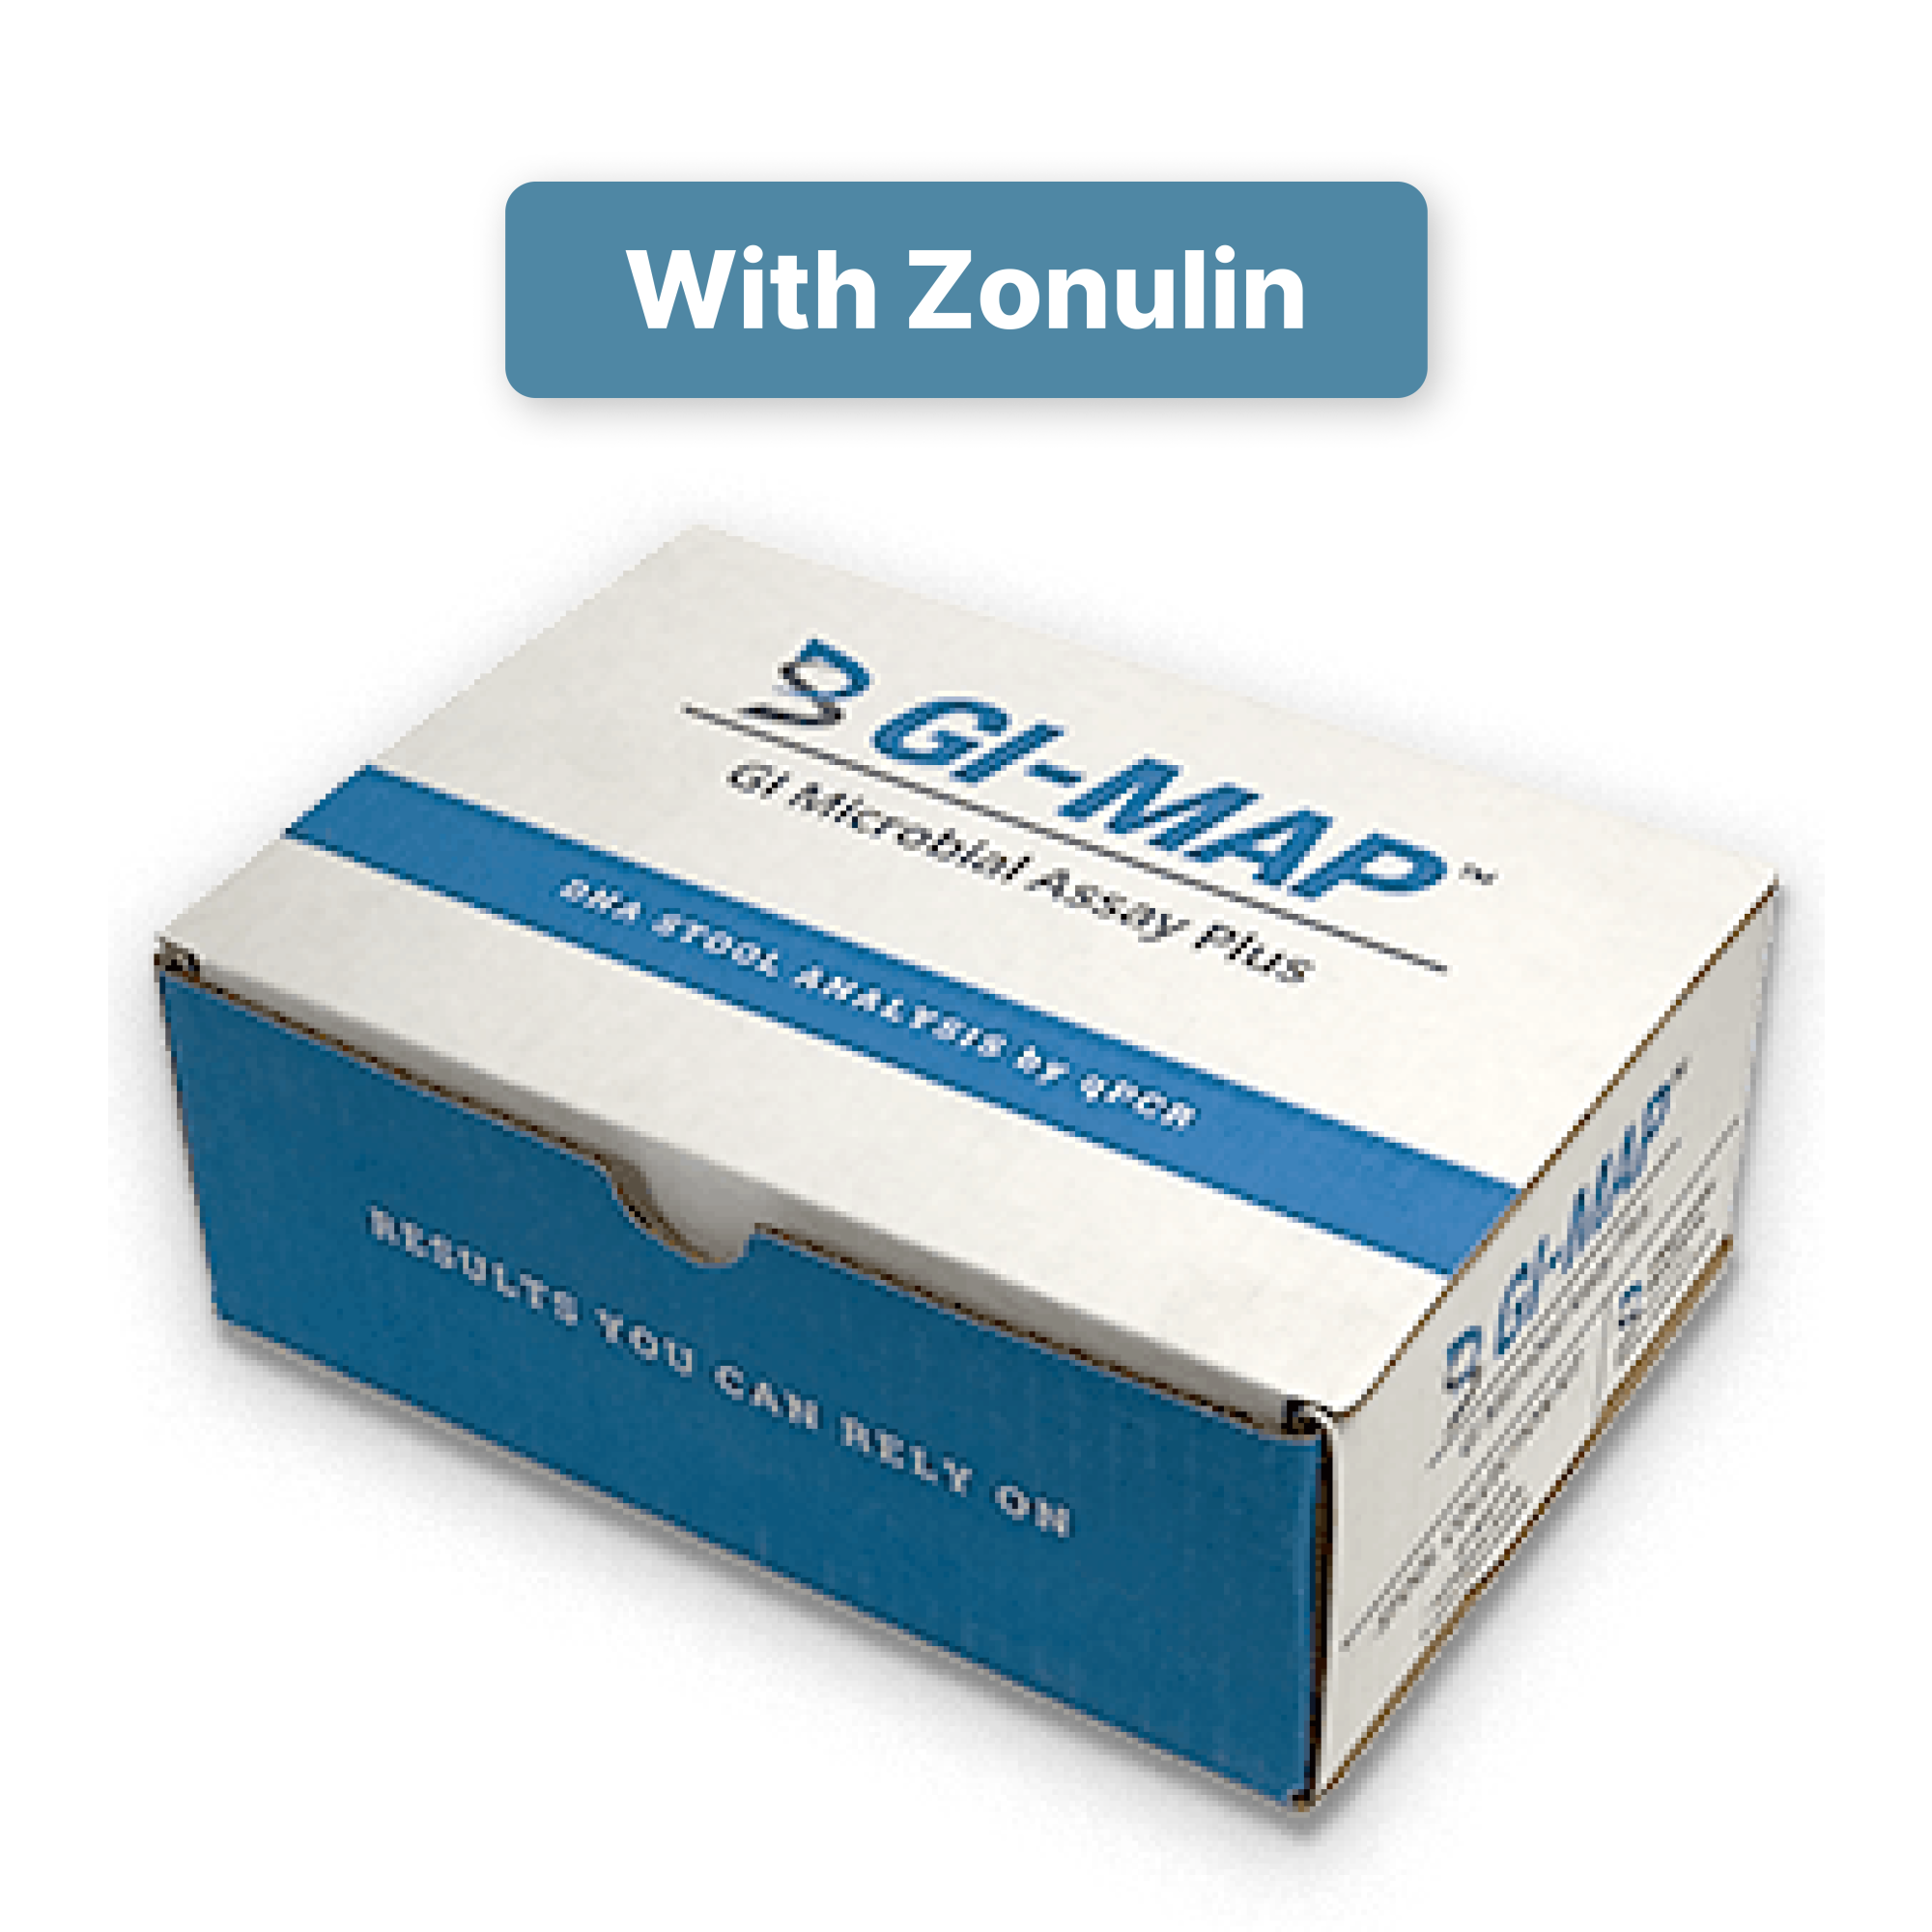 GI MAP Stool Analysis with Zonulin offered by Diagnostic Solution Laboratory, US iThrive Essentials